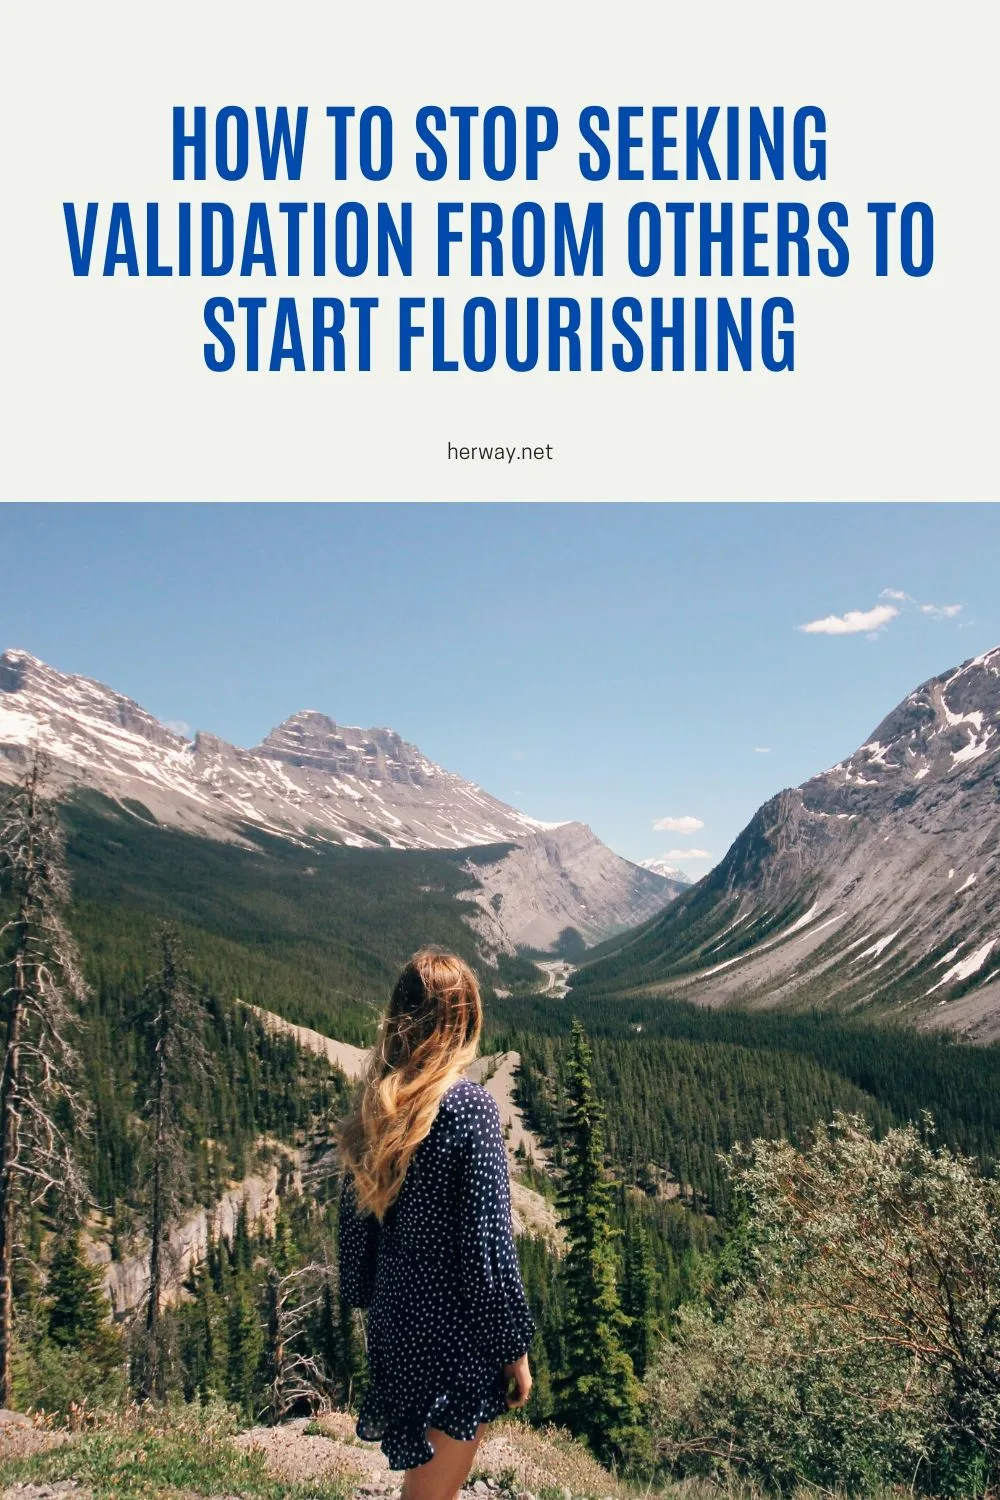 How To Stop Seeking Validation From Others To Start Flourishing